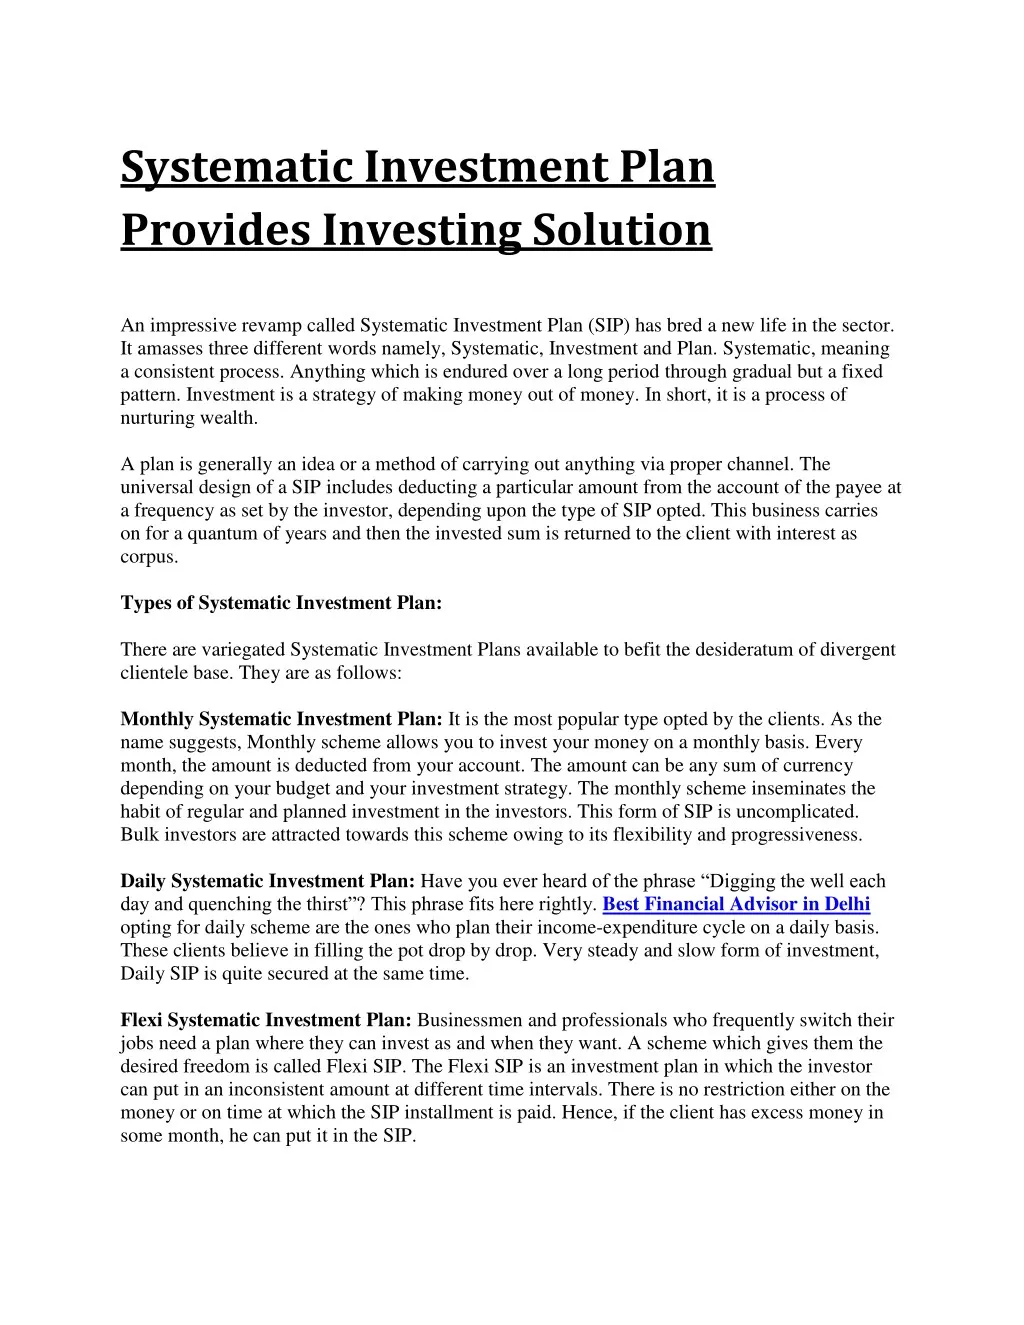 systematic investment plan provides investing